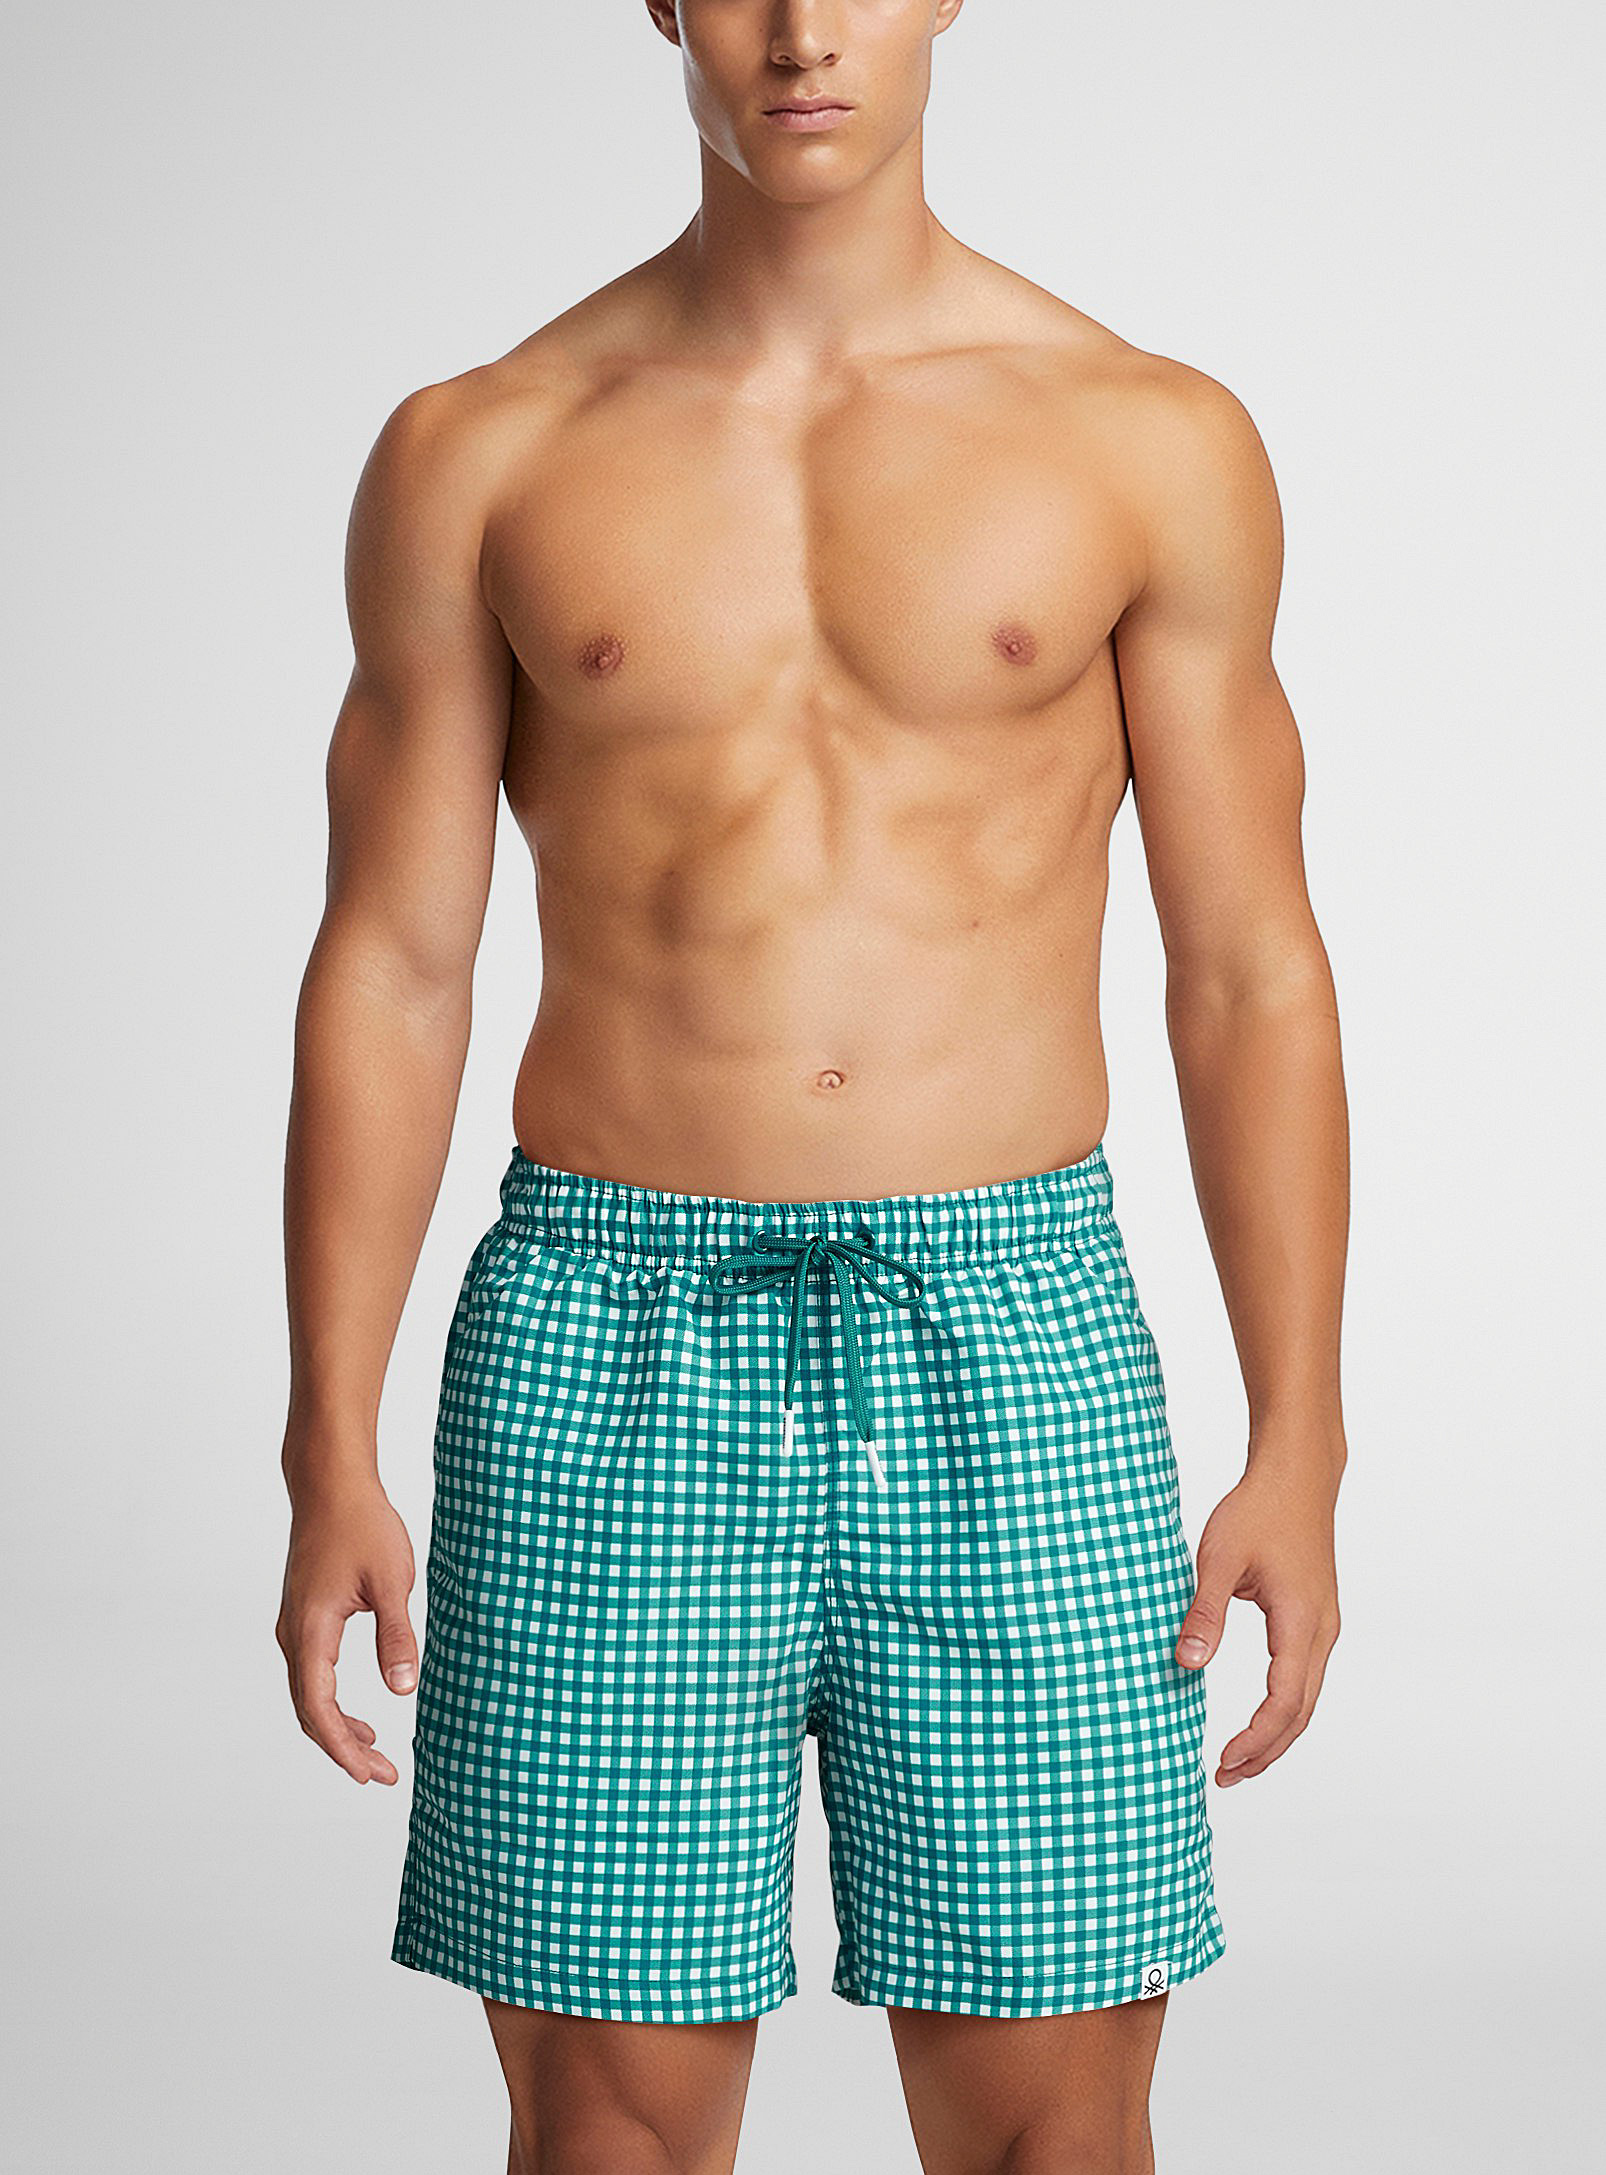 United Colors Of Benetton Sea-green Gingham Swim Trunk In Patterned Green